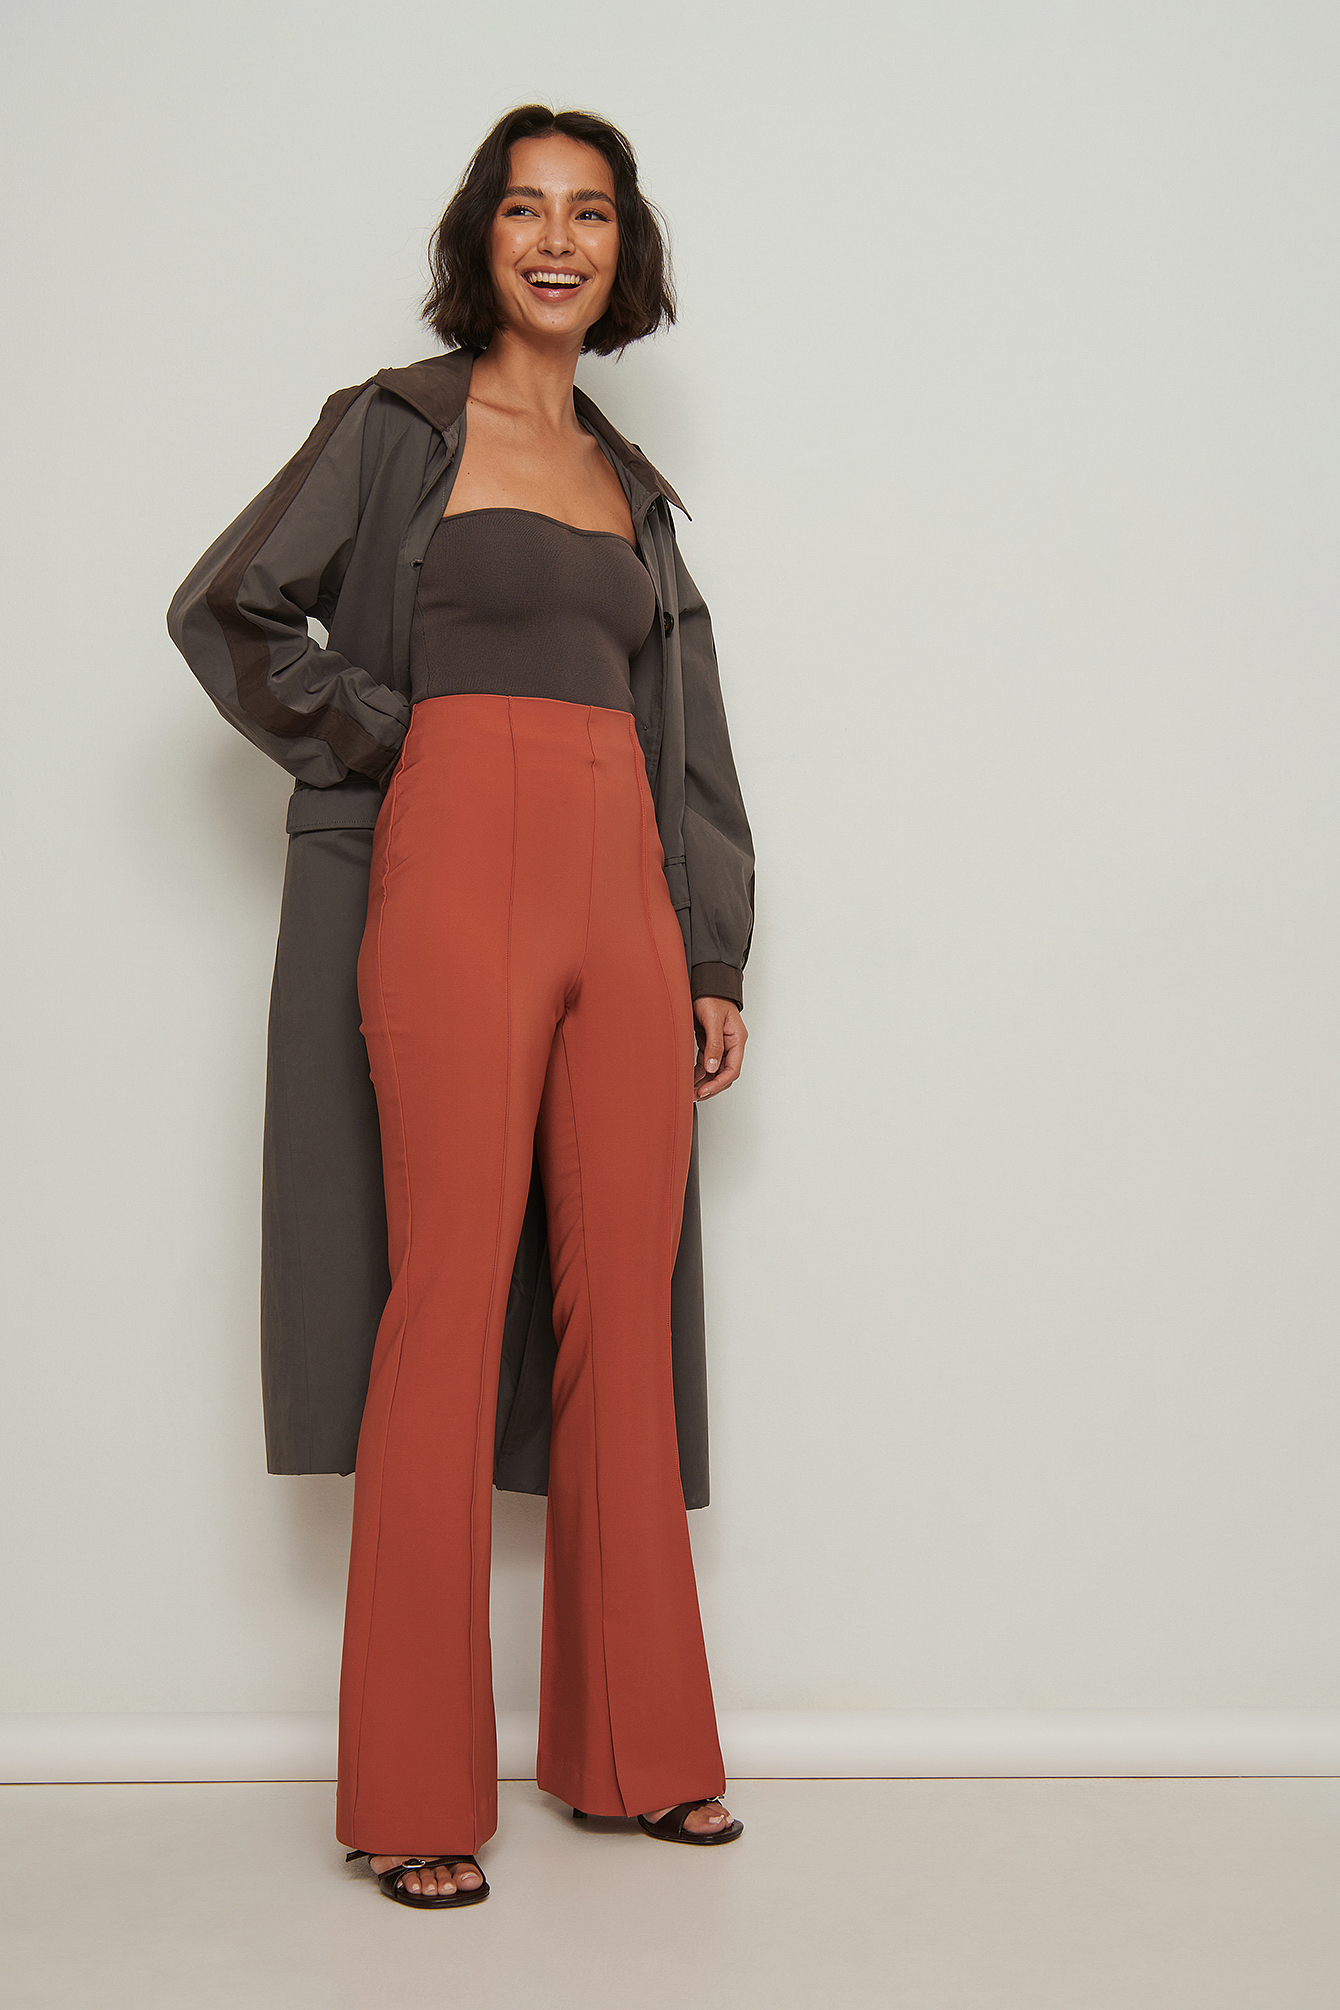 Recycled Slit Detailed Flared Pants Outfit.